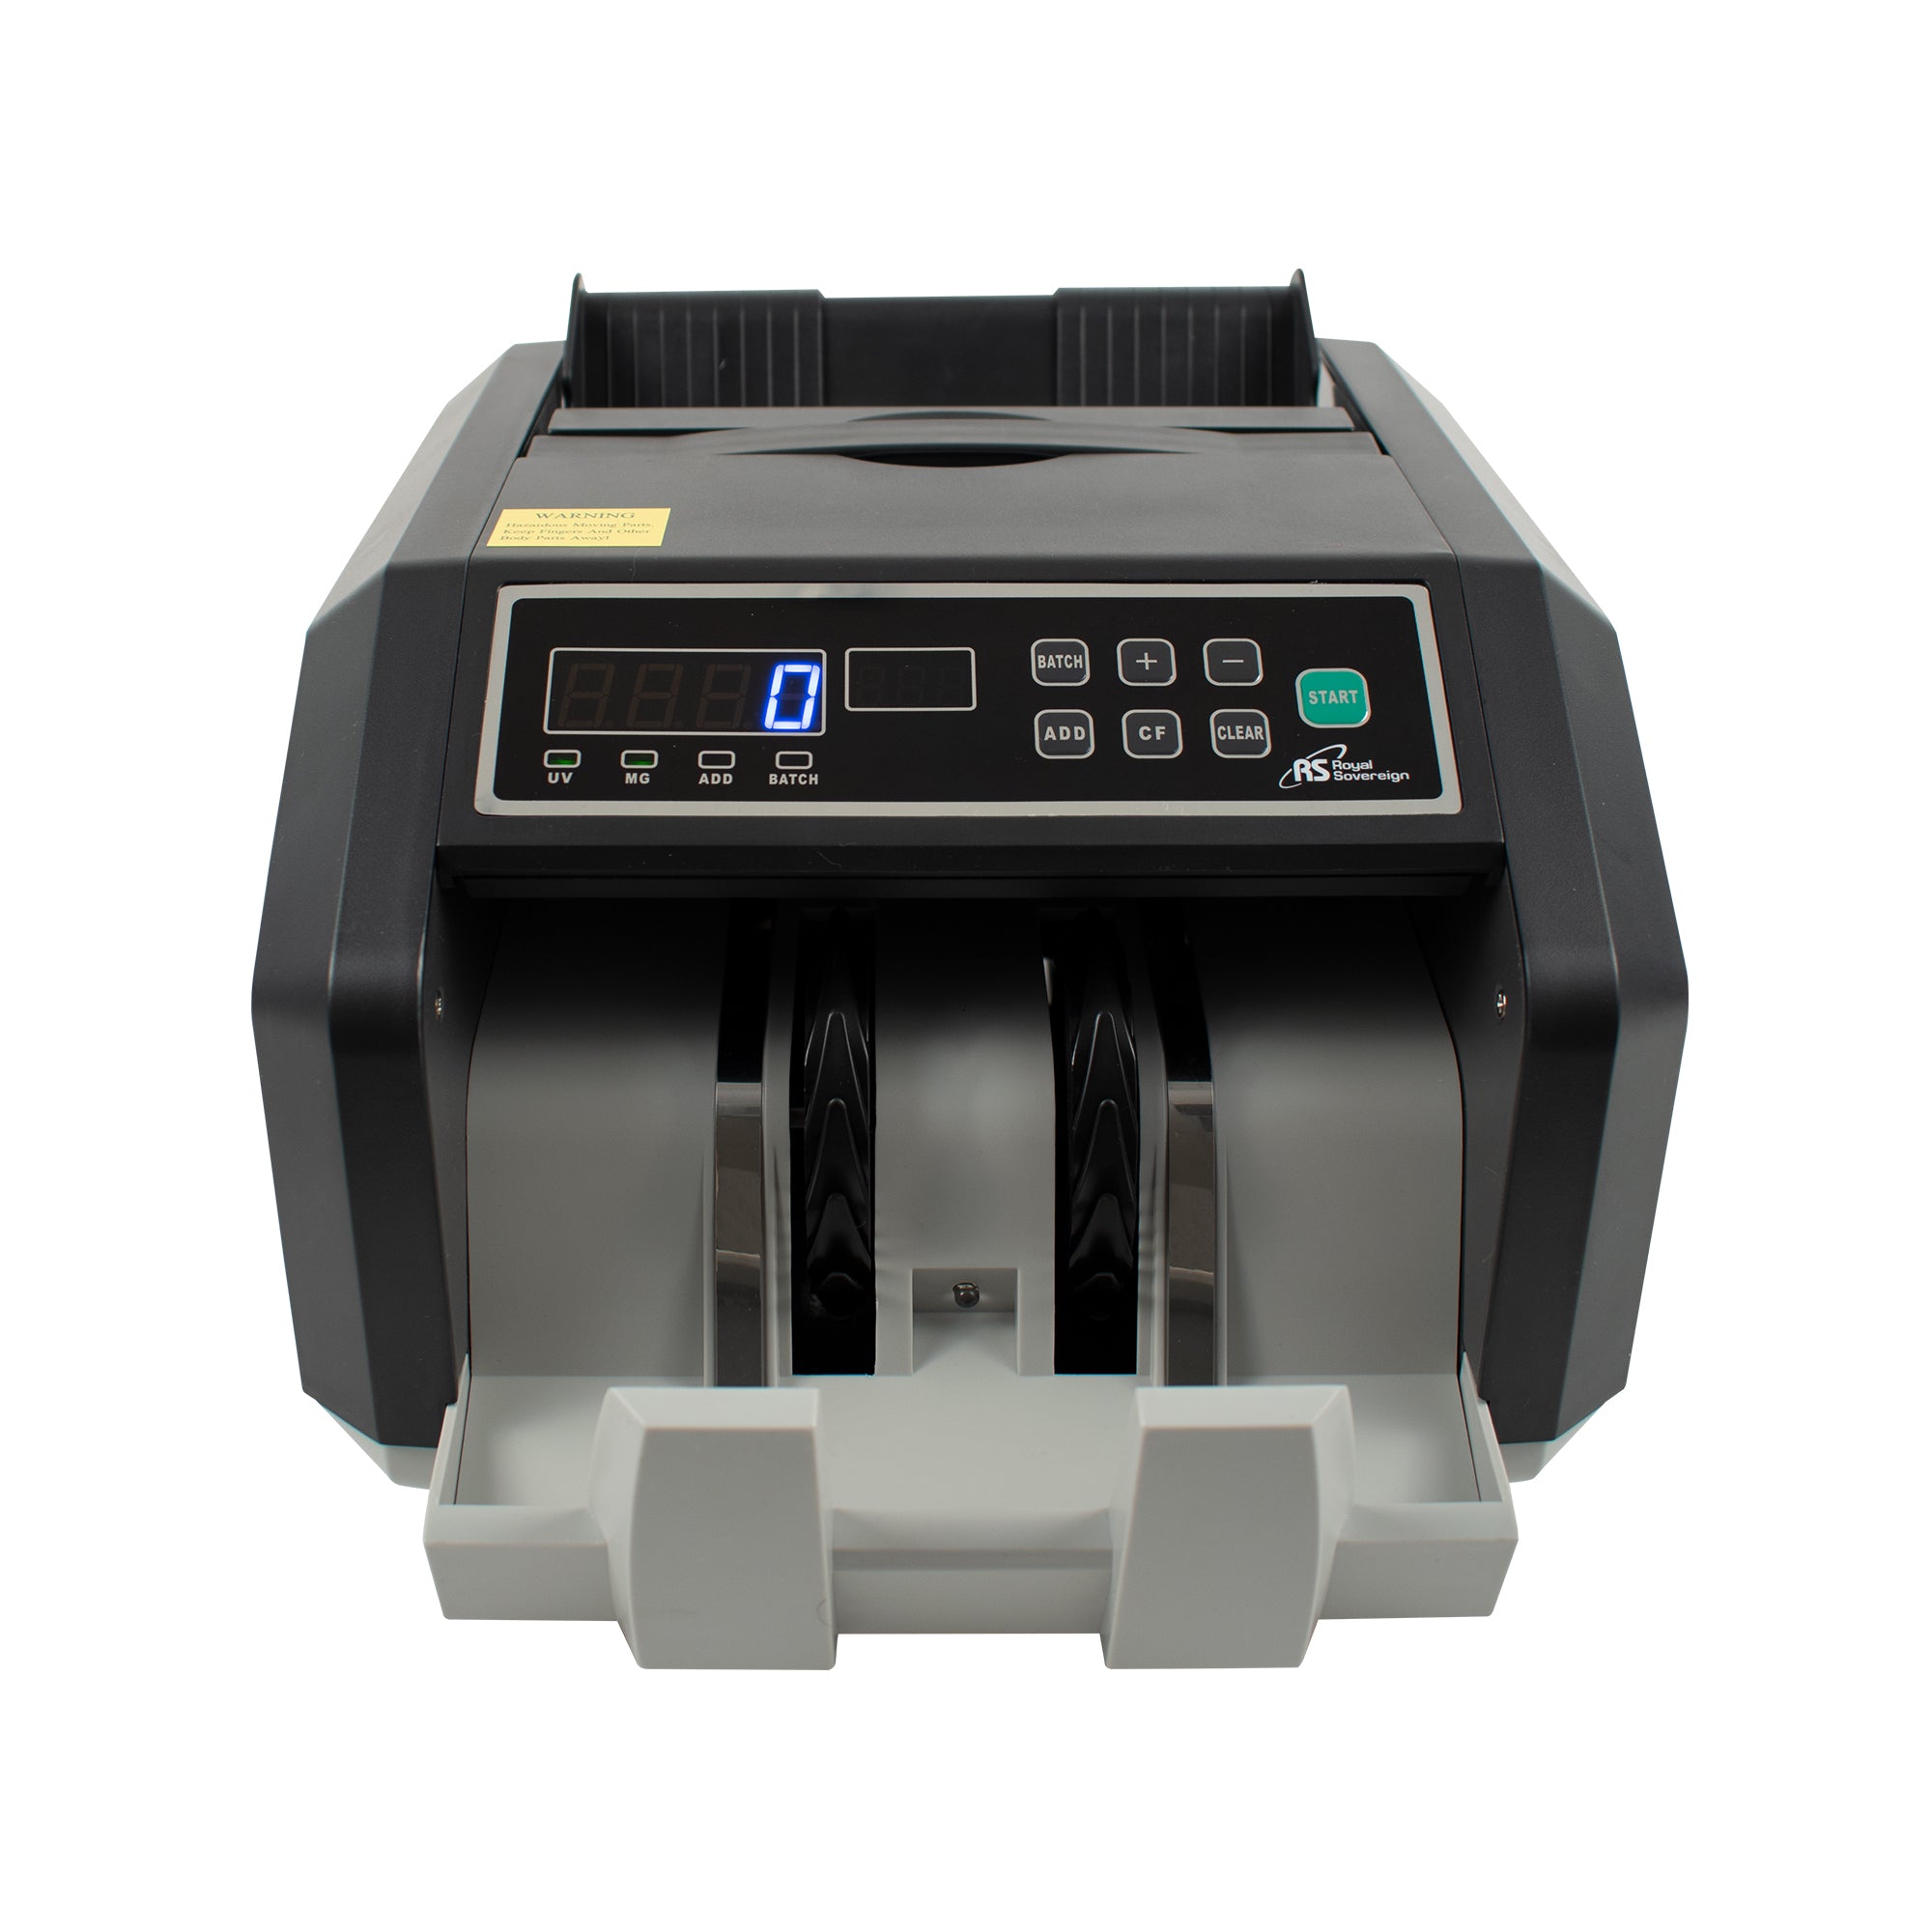 RBC-ES200, Bill Counter with Counterfeit Identification